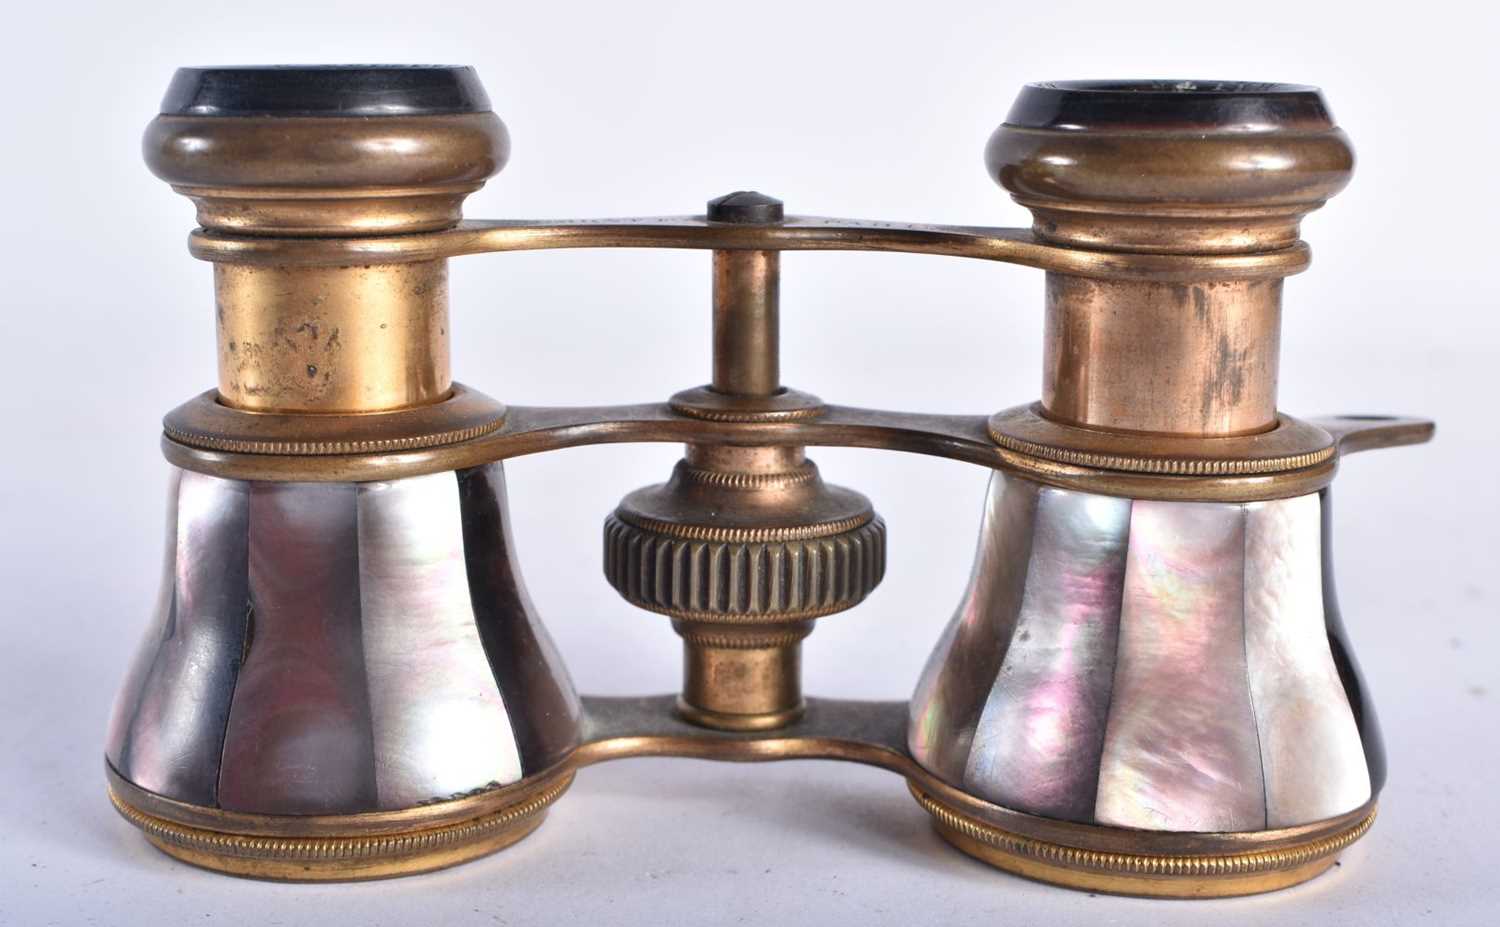 A PAIR OF MOTHER OF PEARL OPERA GLASSES. 6 cm x 10 cm extended. - Image 3 of 5